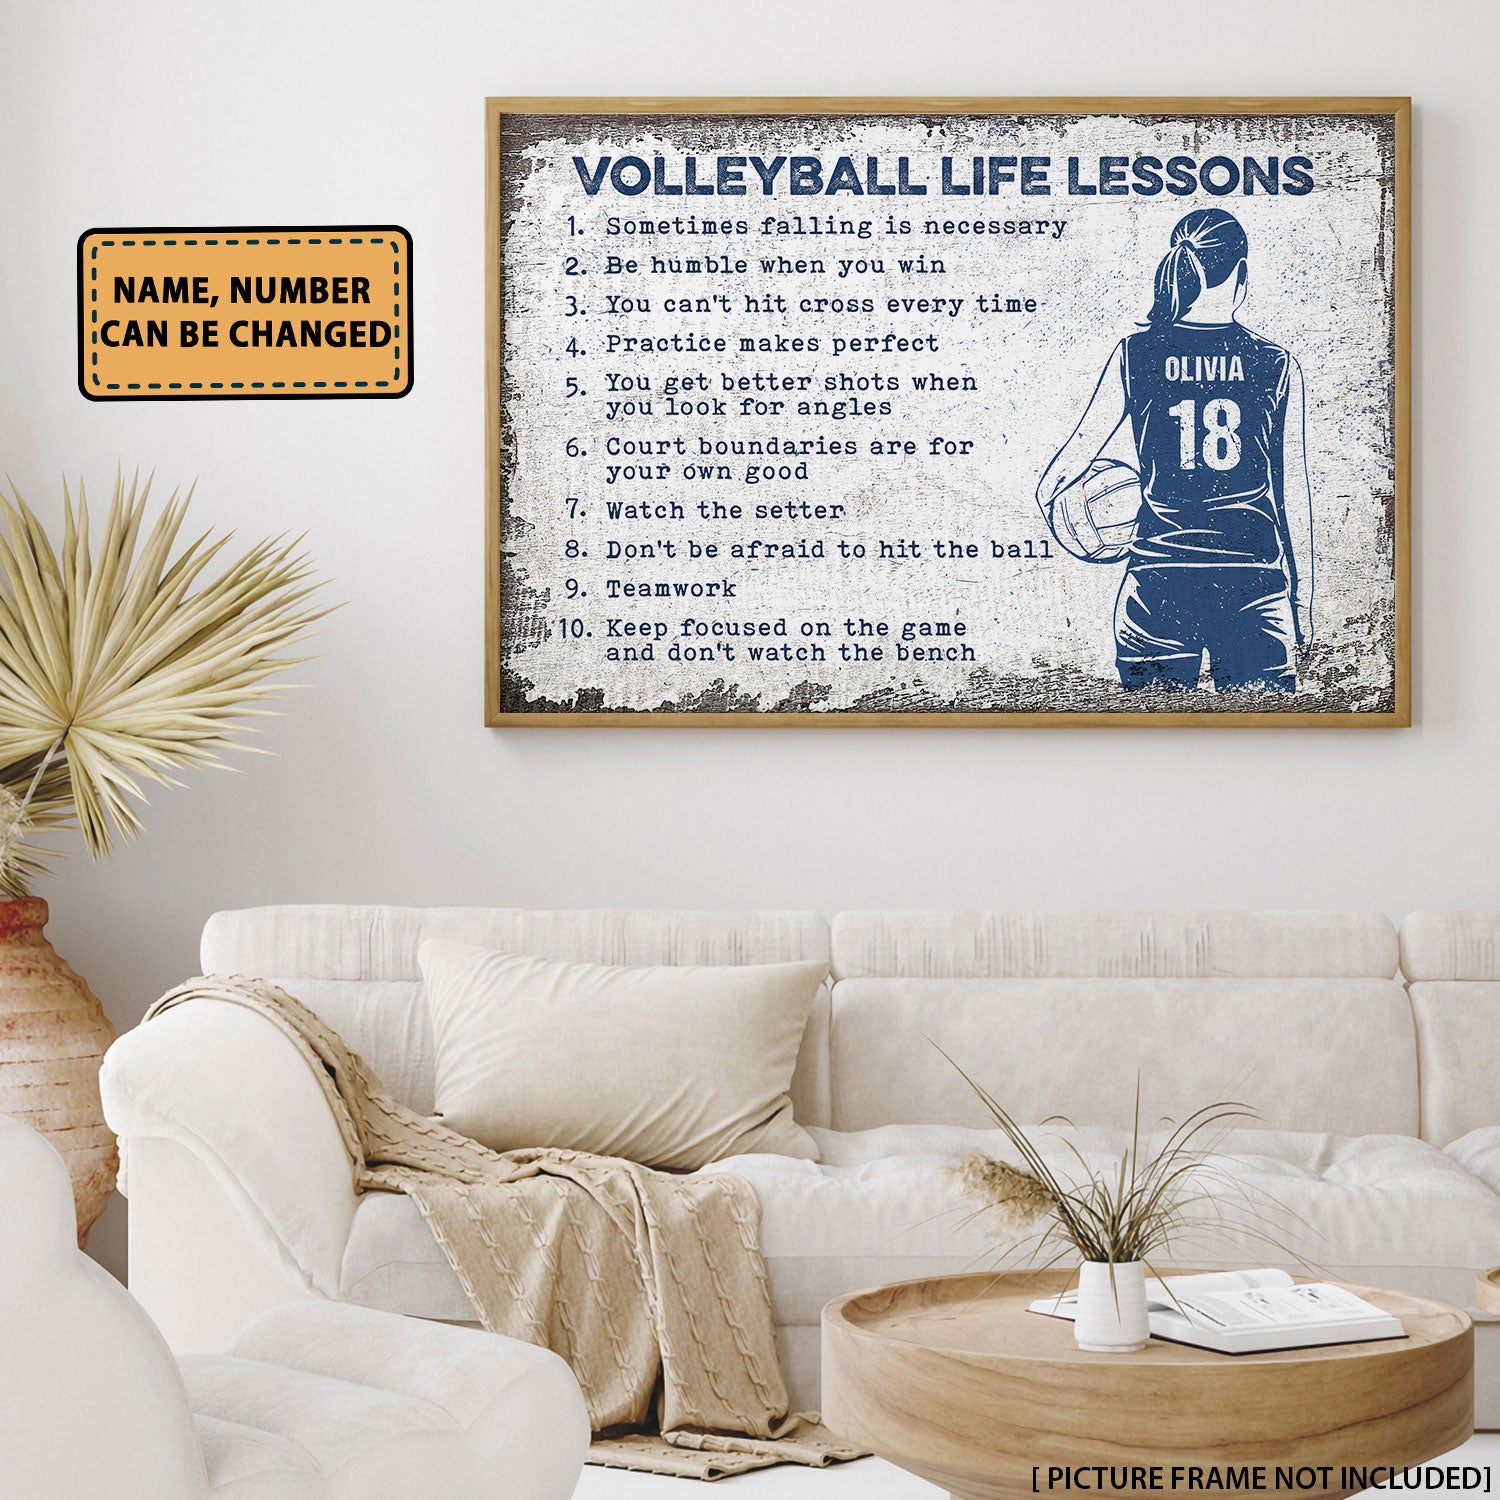 Volleyball Life Lessons